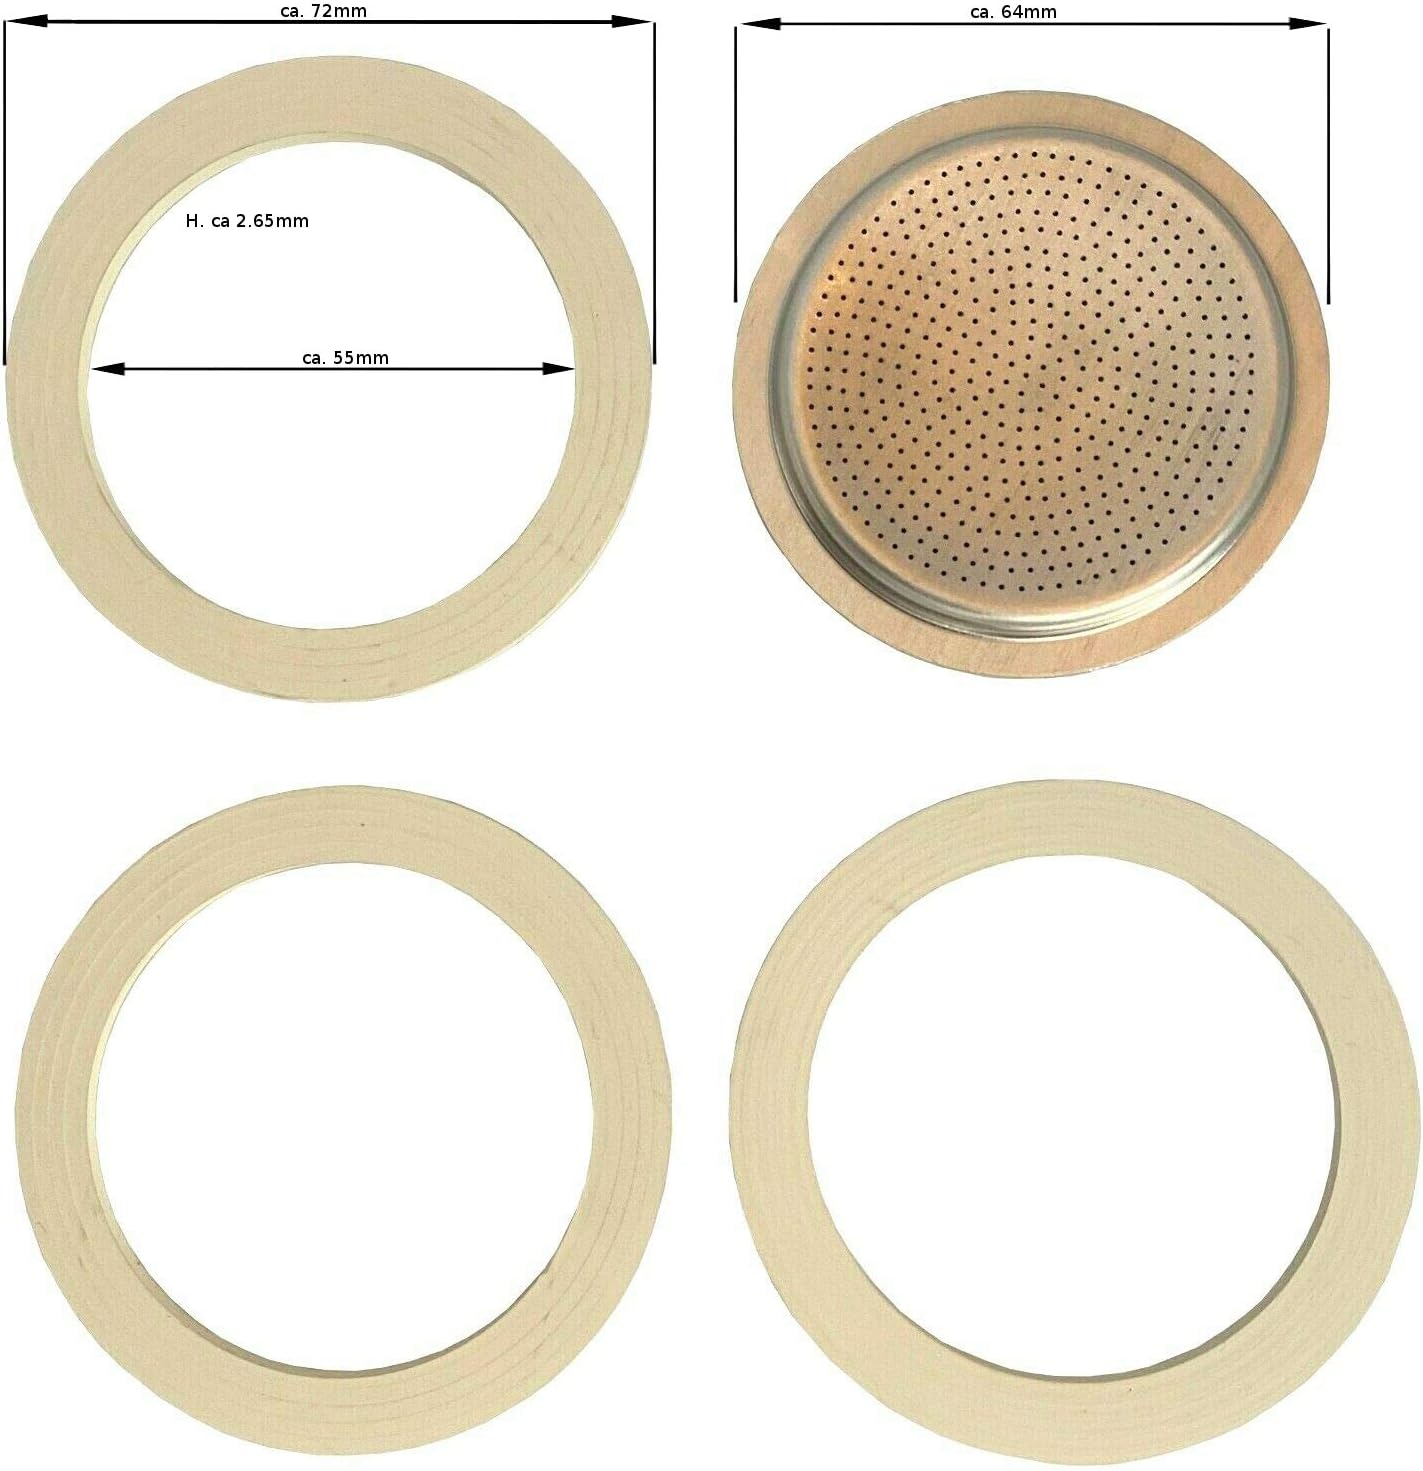 Sergioshop Replacement SEAL SET for Espresso Maker - 6 Cups Aluminum - 3 x Sealing Ring 1 x Replacement Strainer